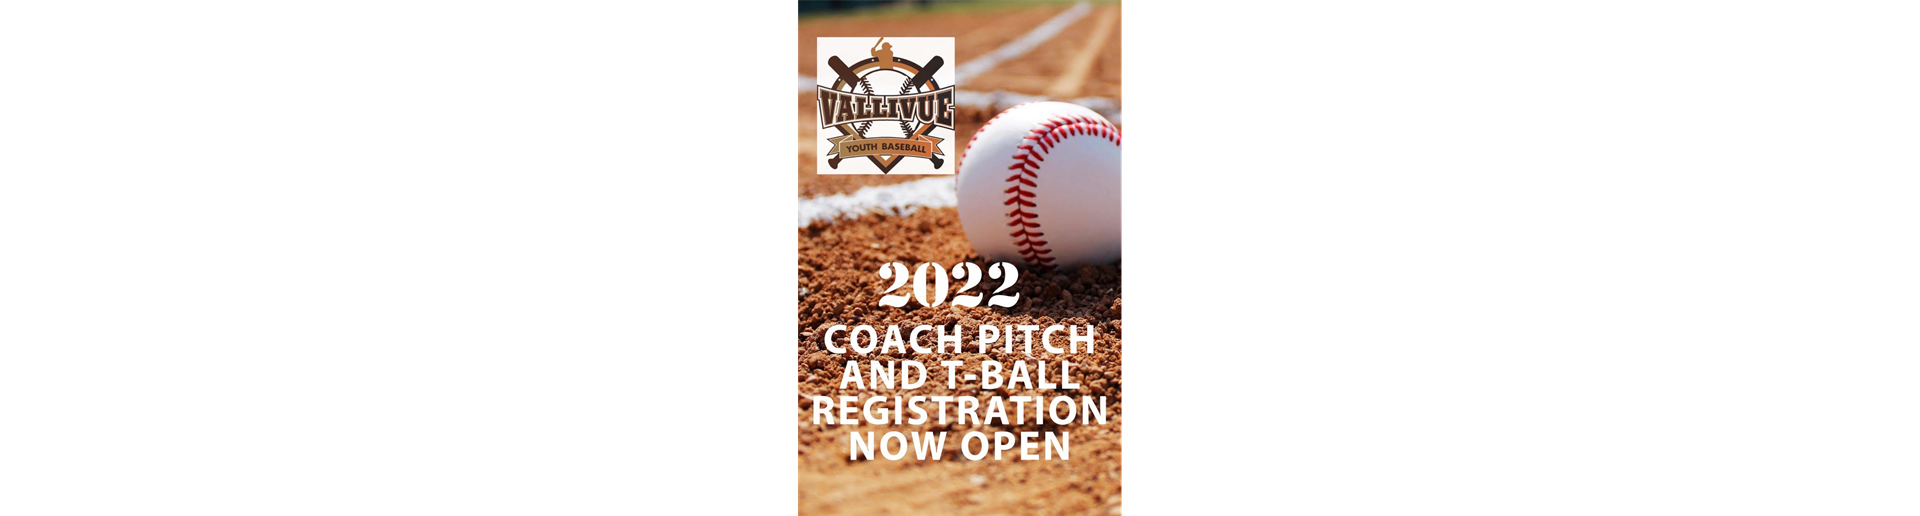 2022 T-ball/Coach Pitch Registration Now Open!